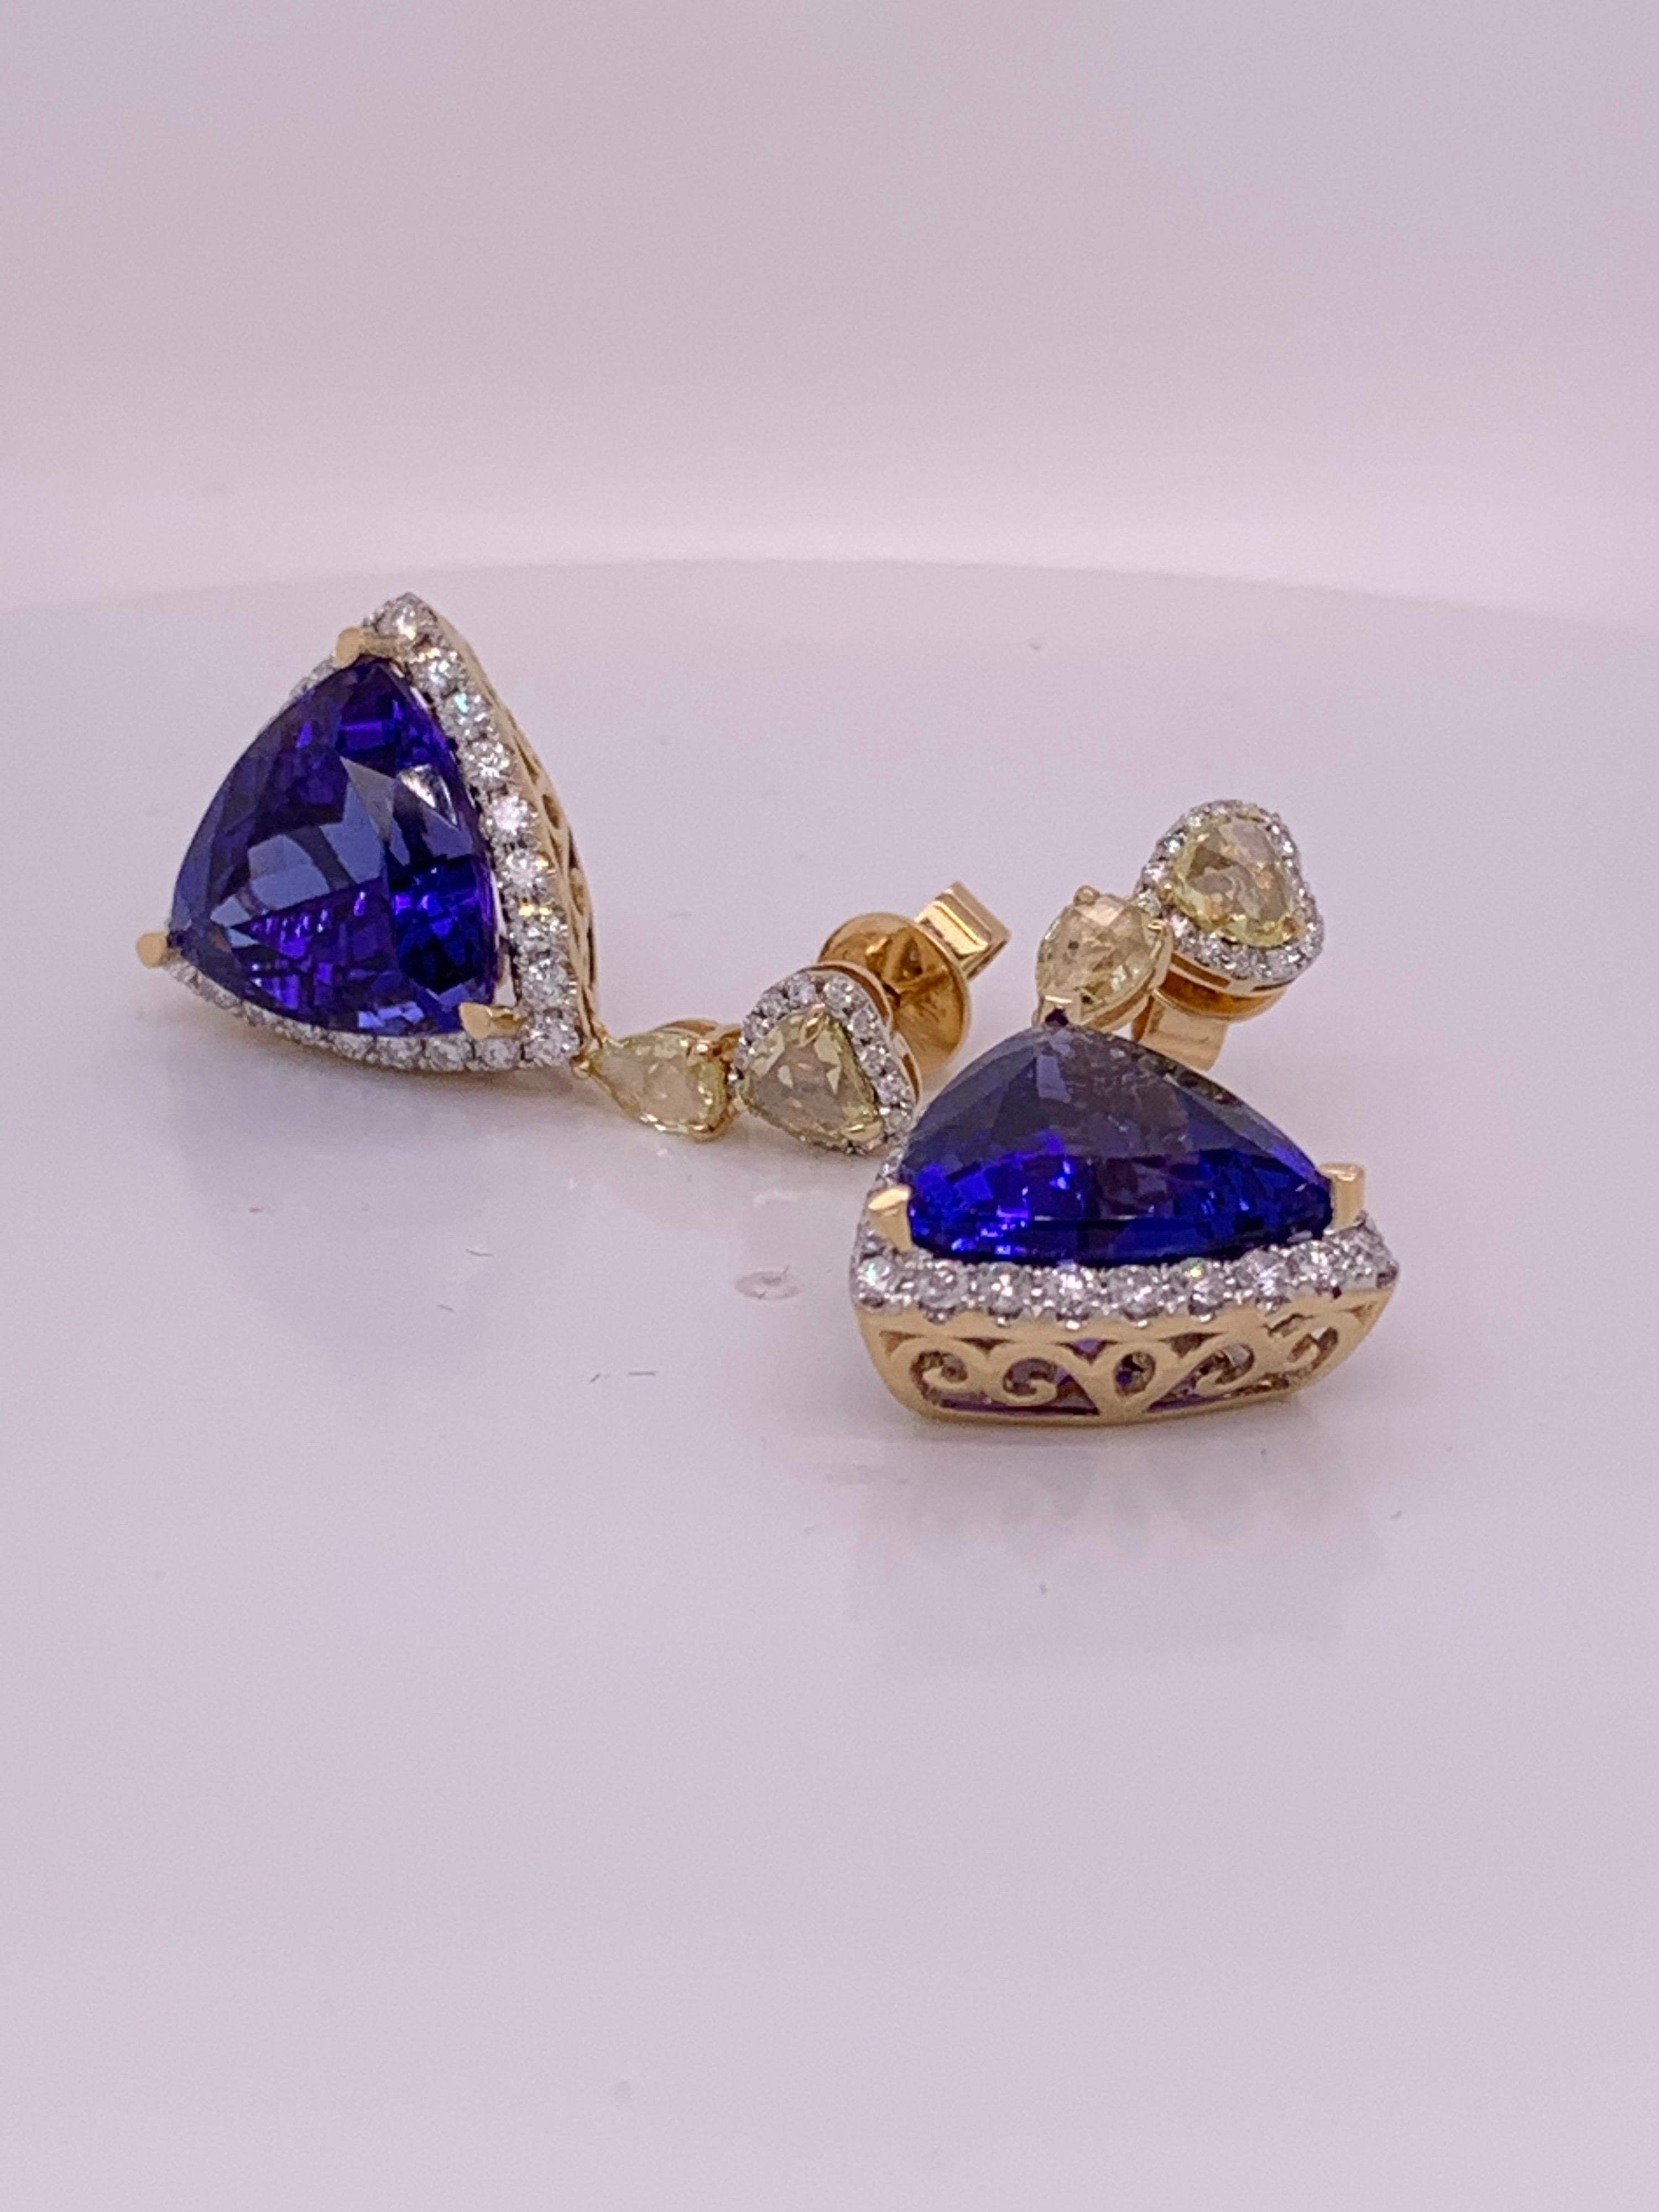 15.83 Carat Tanzanite Dangle Earrings with Yellow and White Diamond For Sale 3